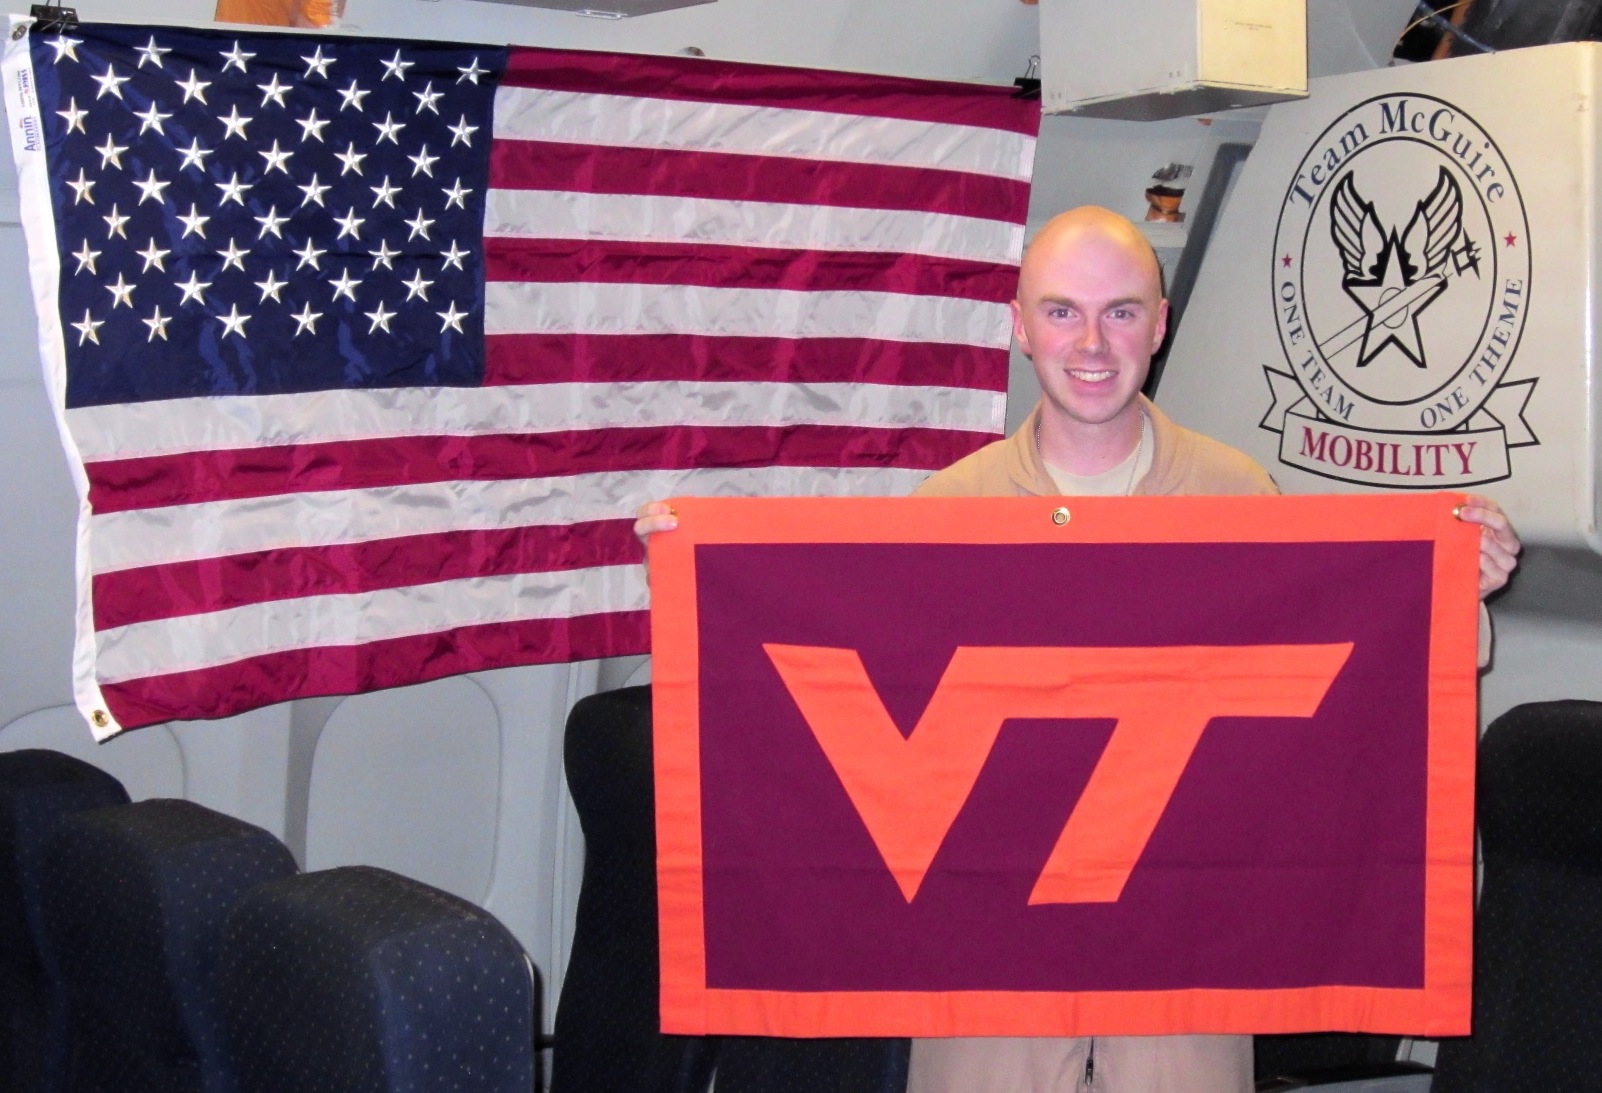 Capt. Mark Amos, U.S. Air Force, Virginia Tech Corps of Cadets Class of 2008 shown inside his aircraft with a VT flag.